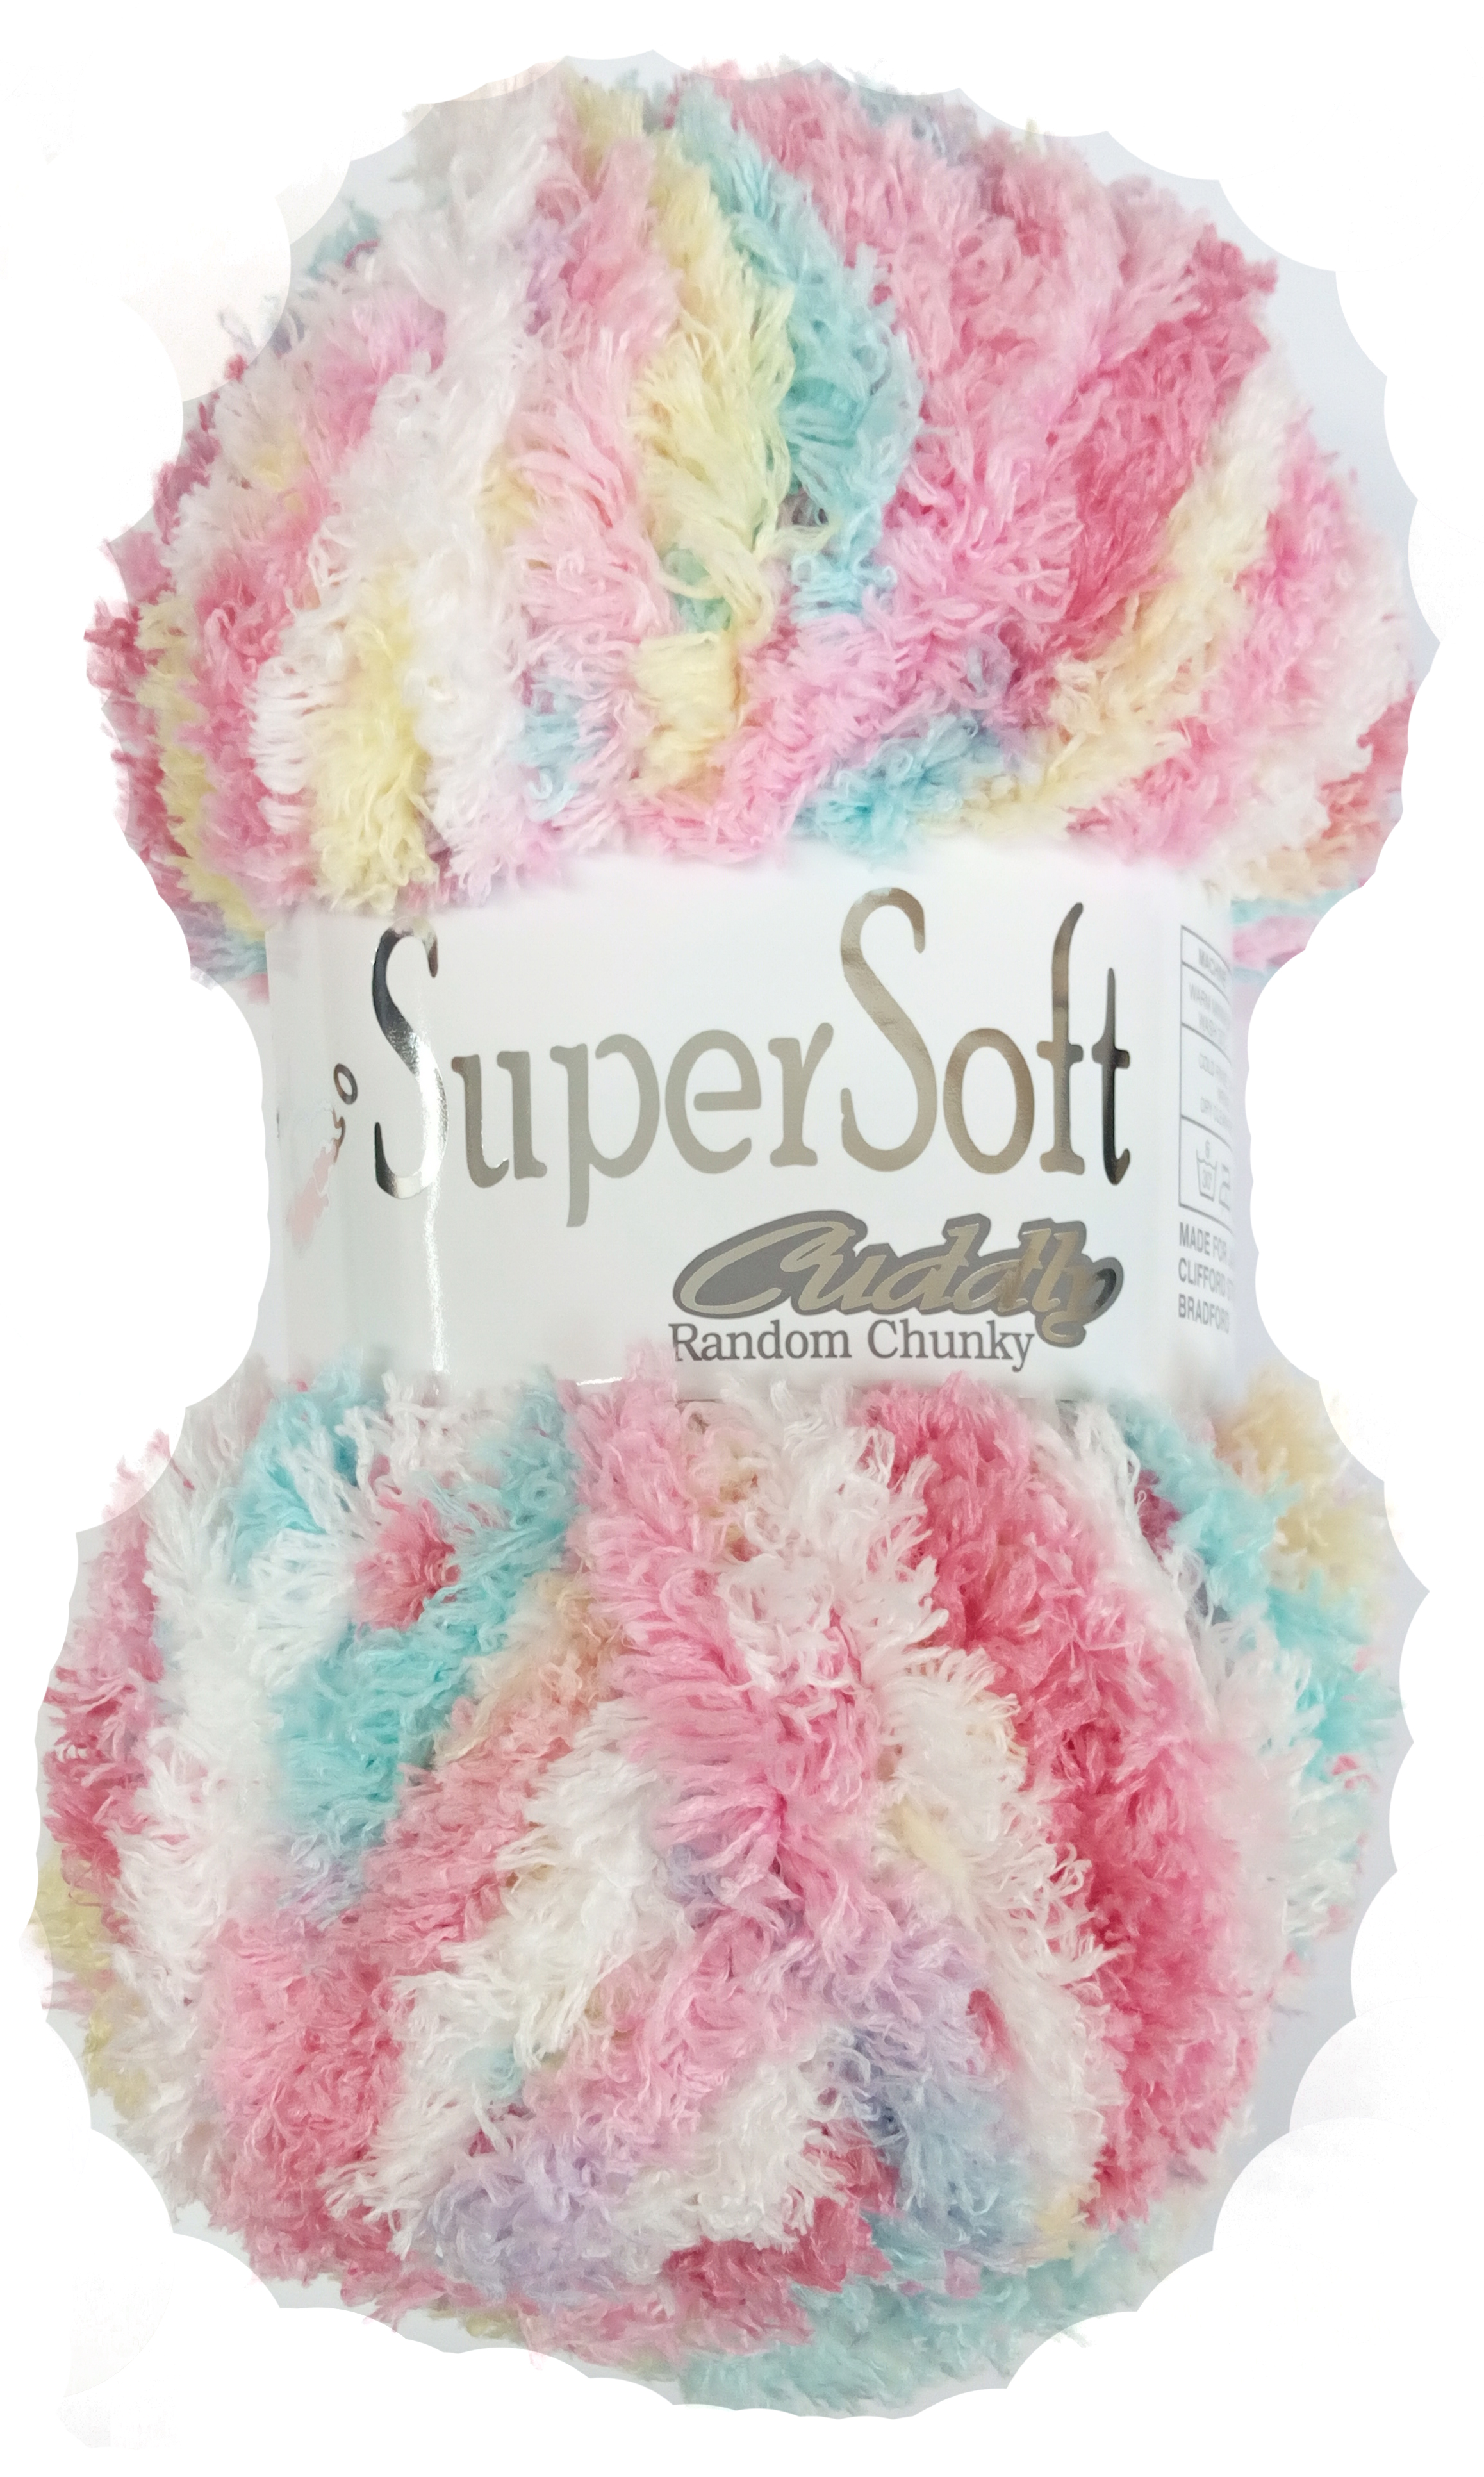 Super Soft Cuddly Yarn Flossie - Click Image to Close